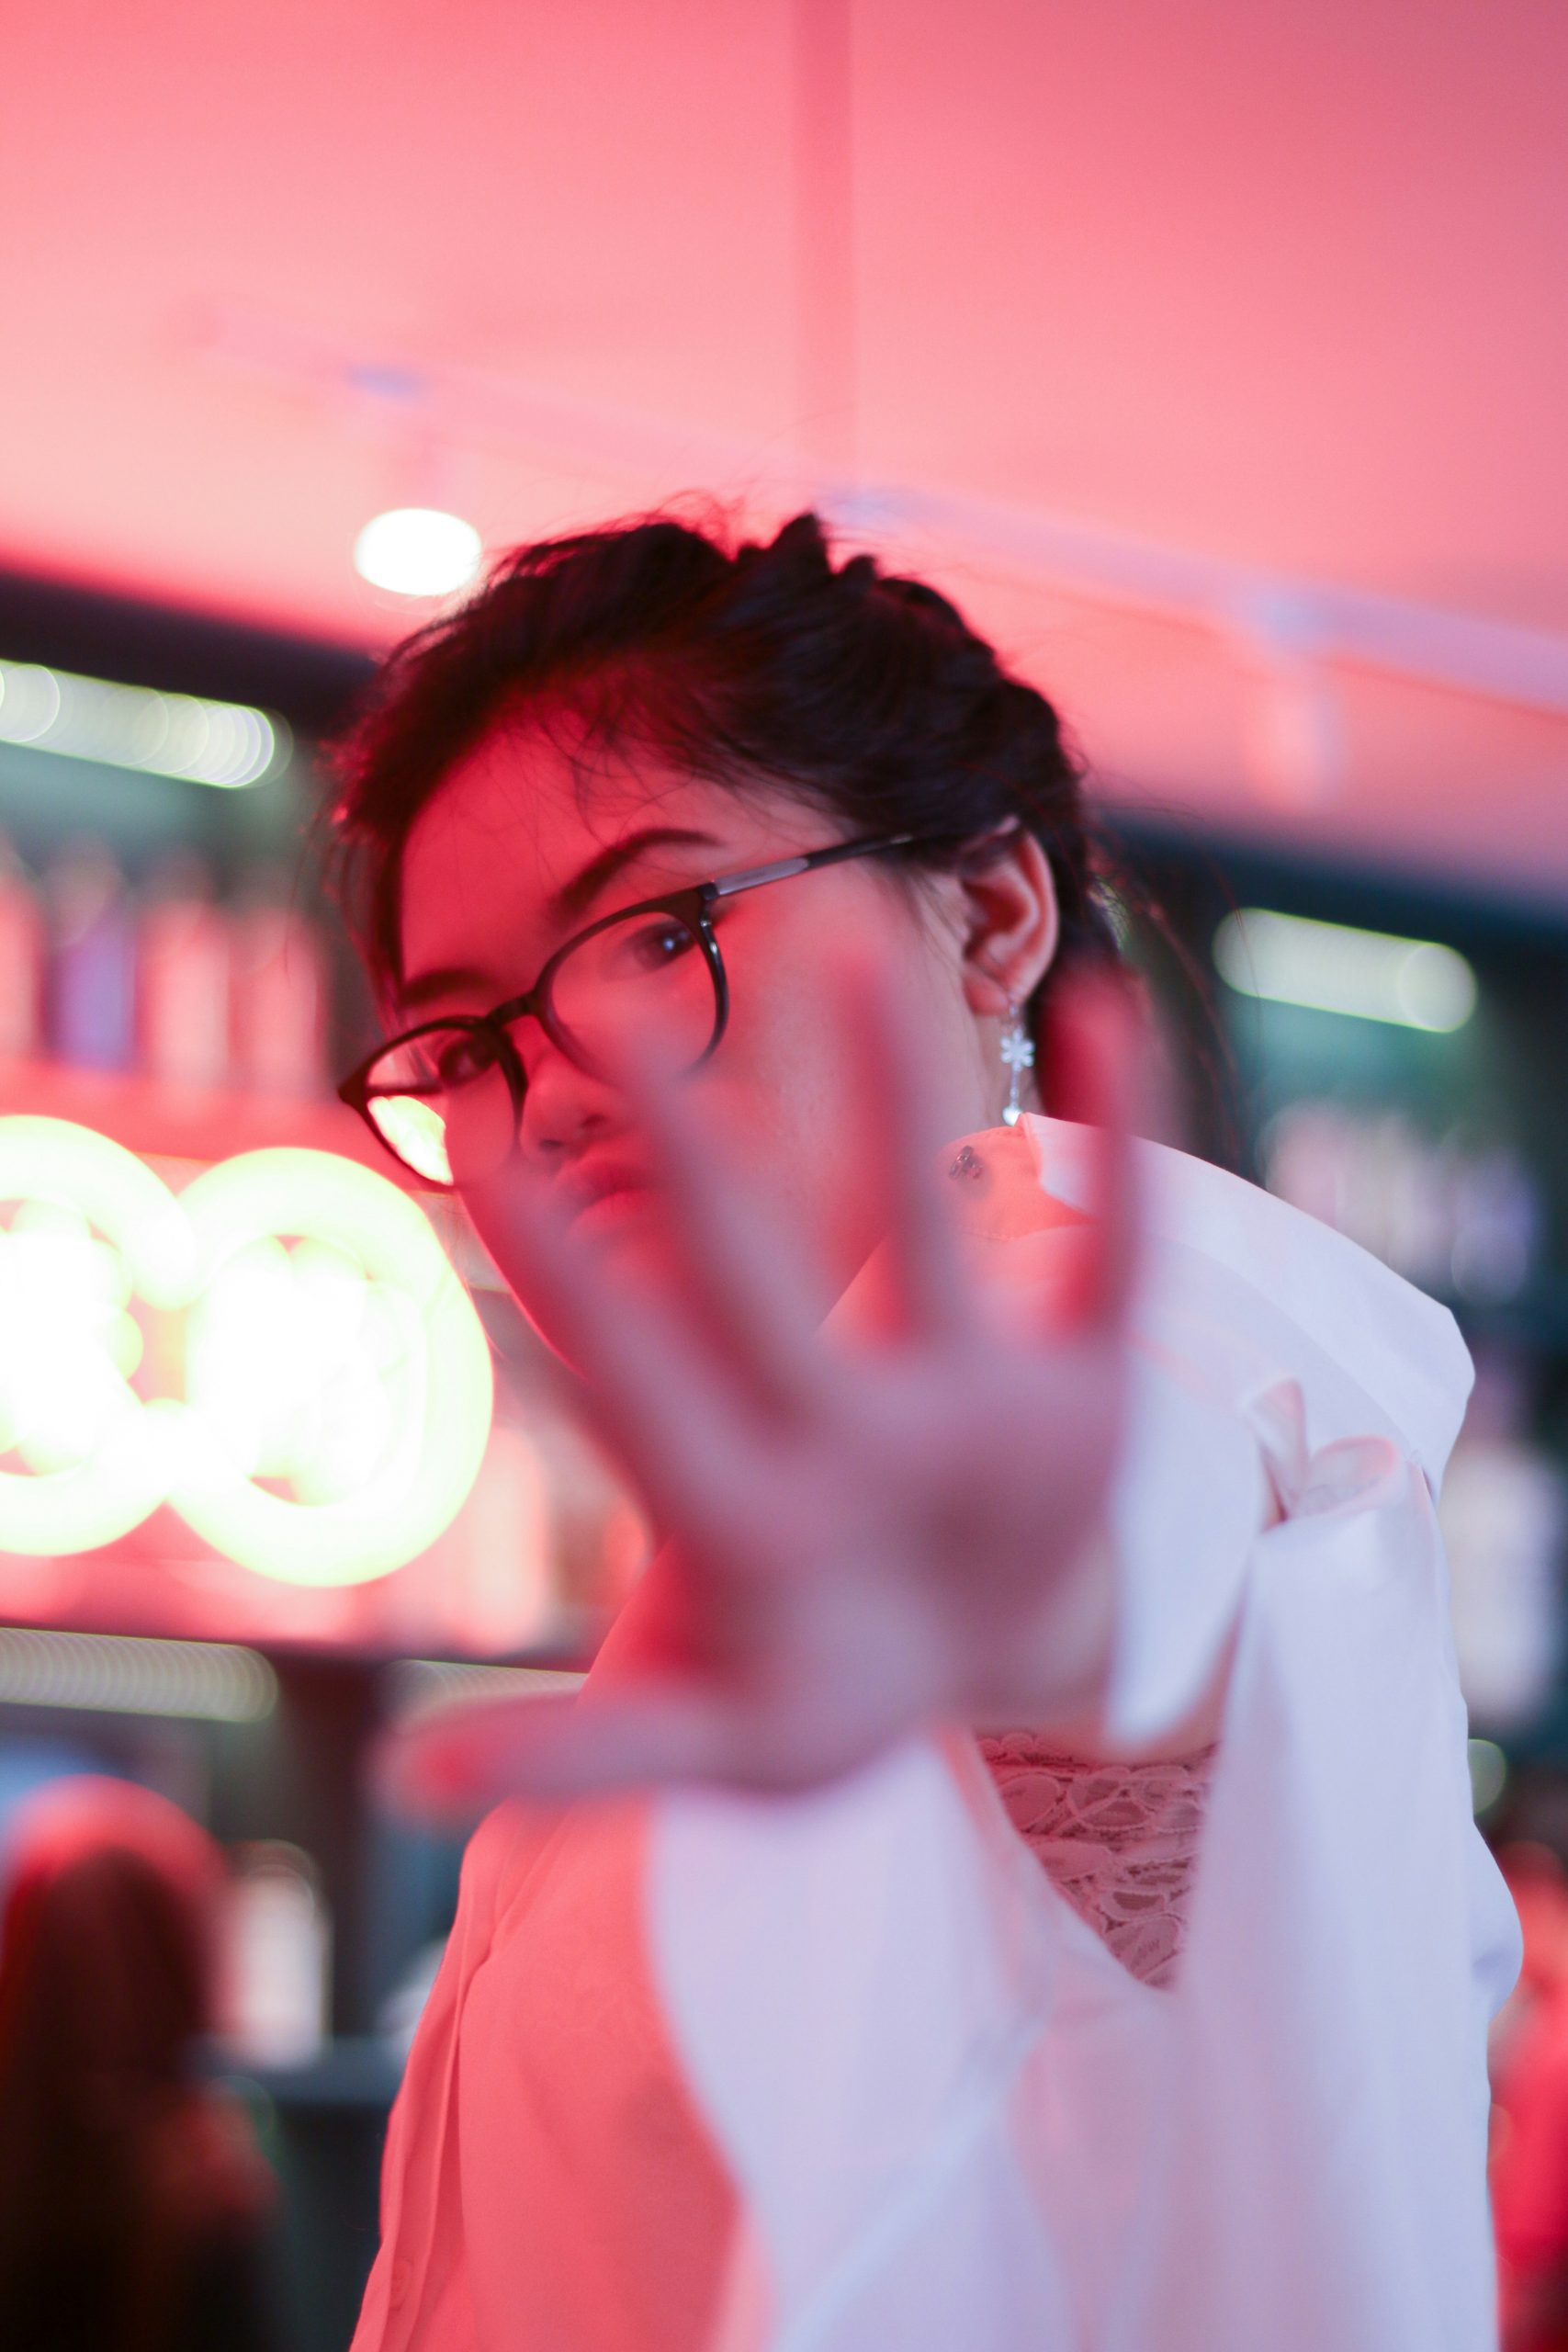 Asian woman making "talk to the hand" gesture